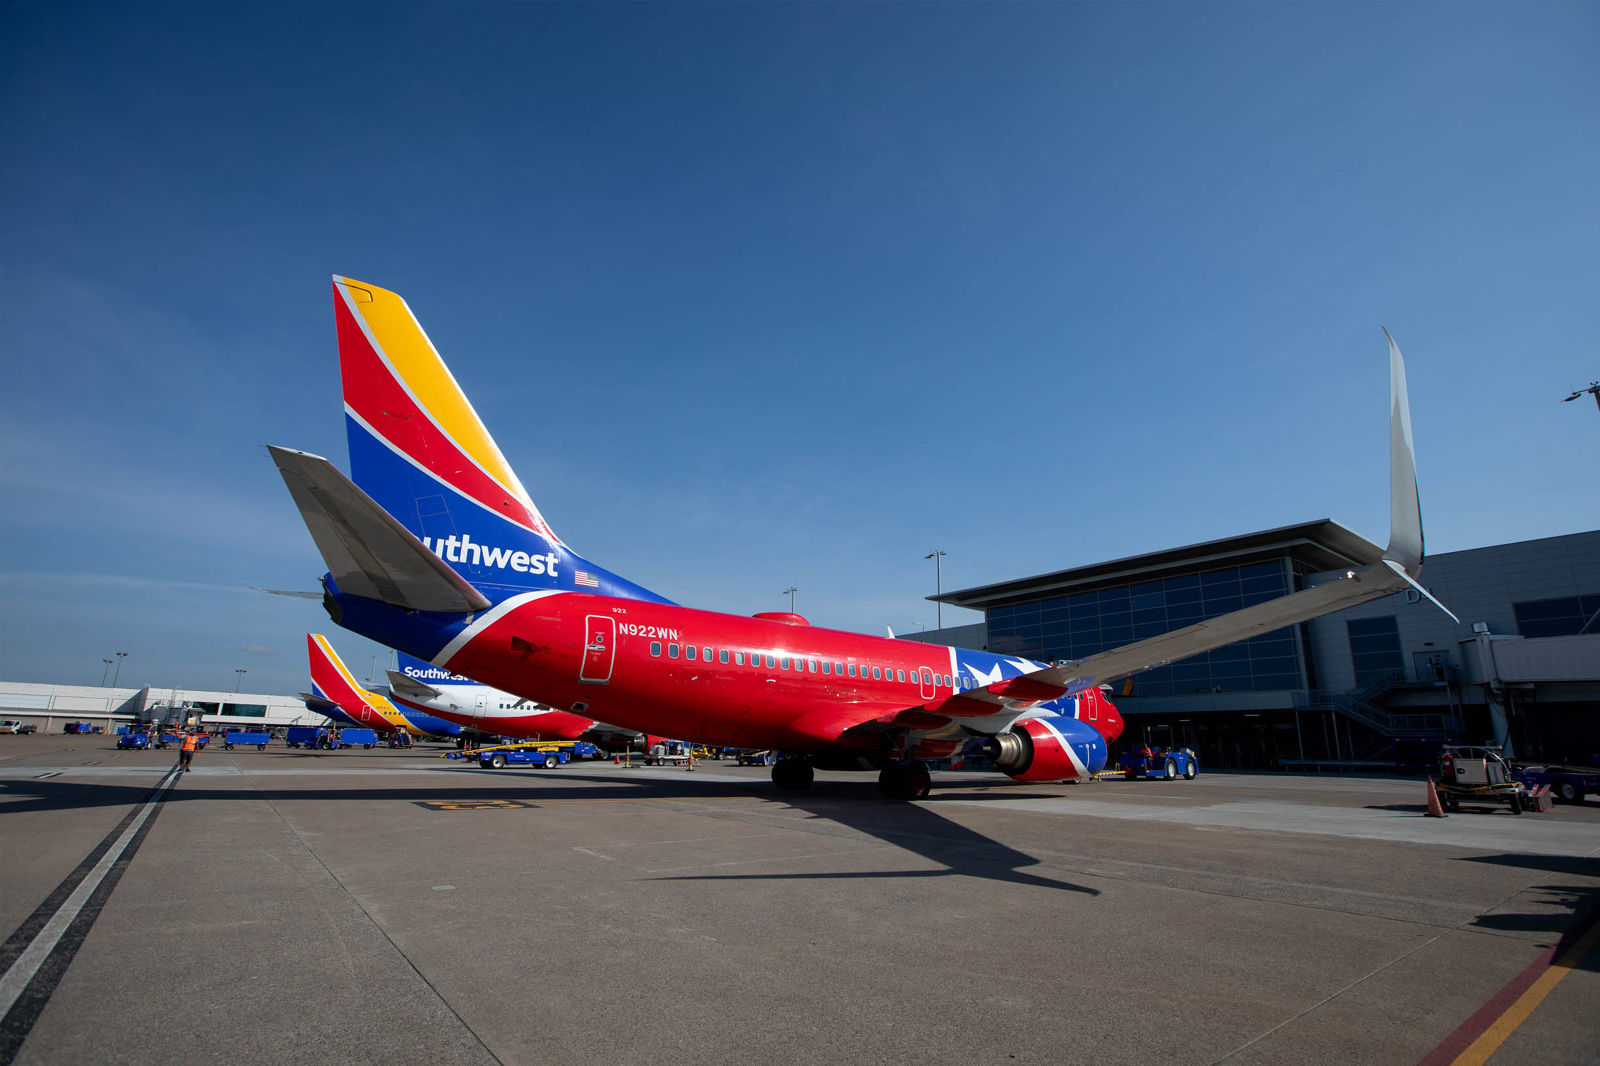 Southwest Airlines offers full business content on Amadeus